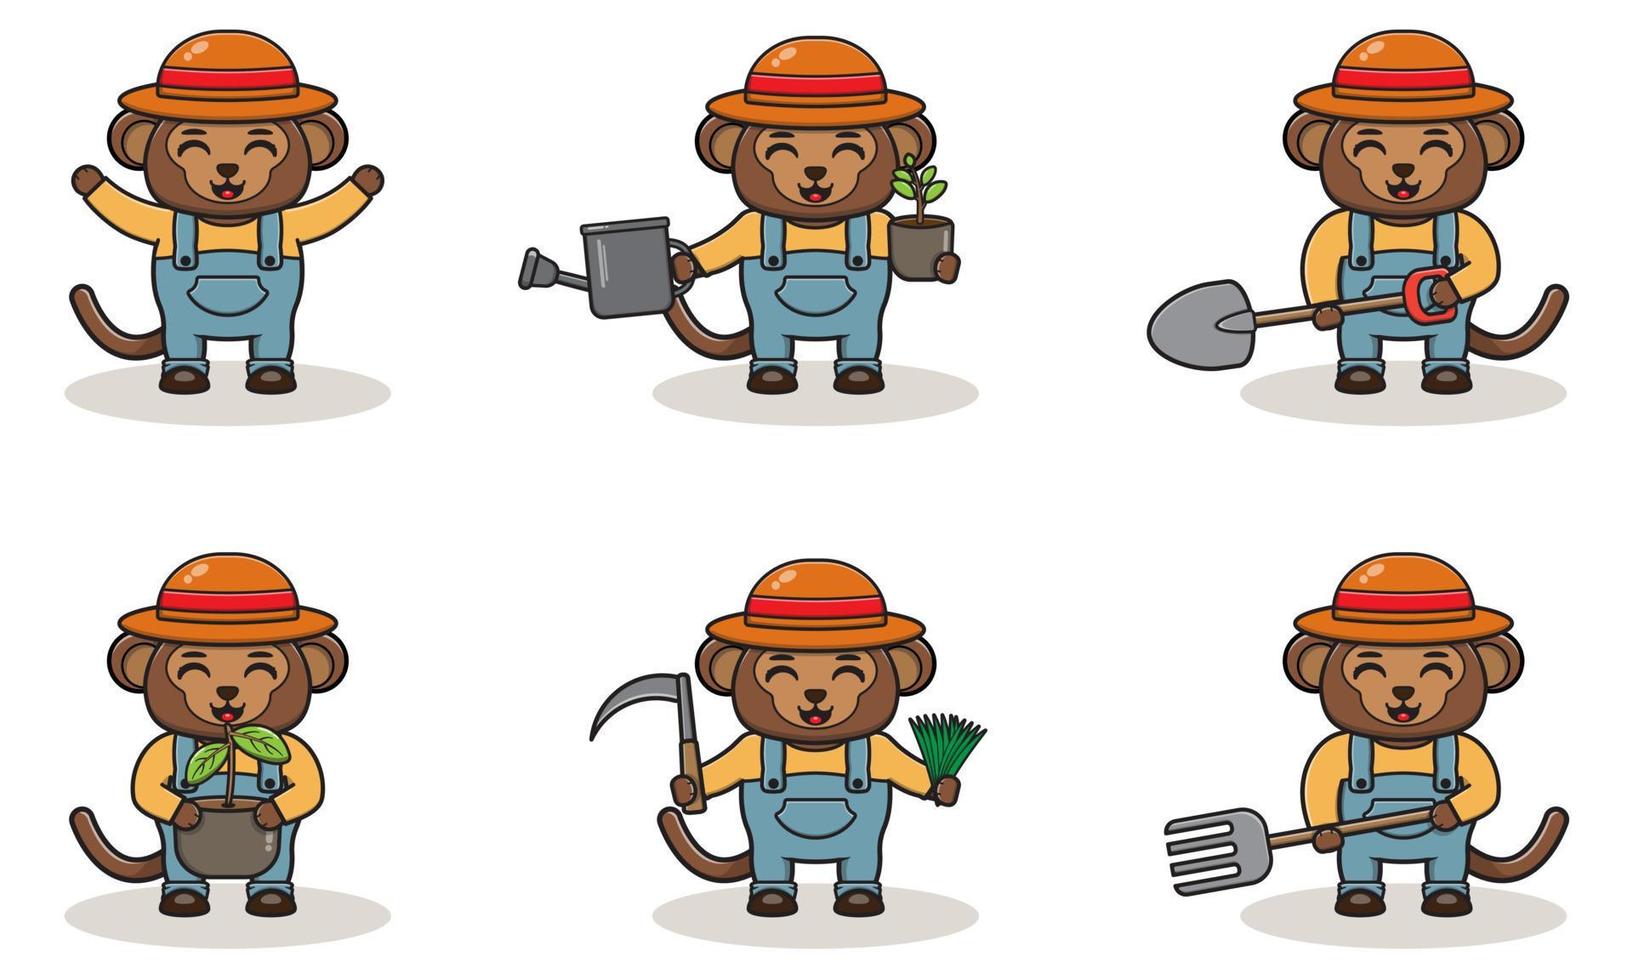 Cute Monkey farmer character design with straw hat. vector